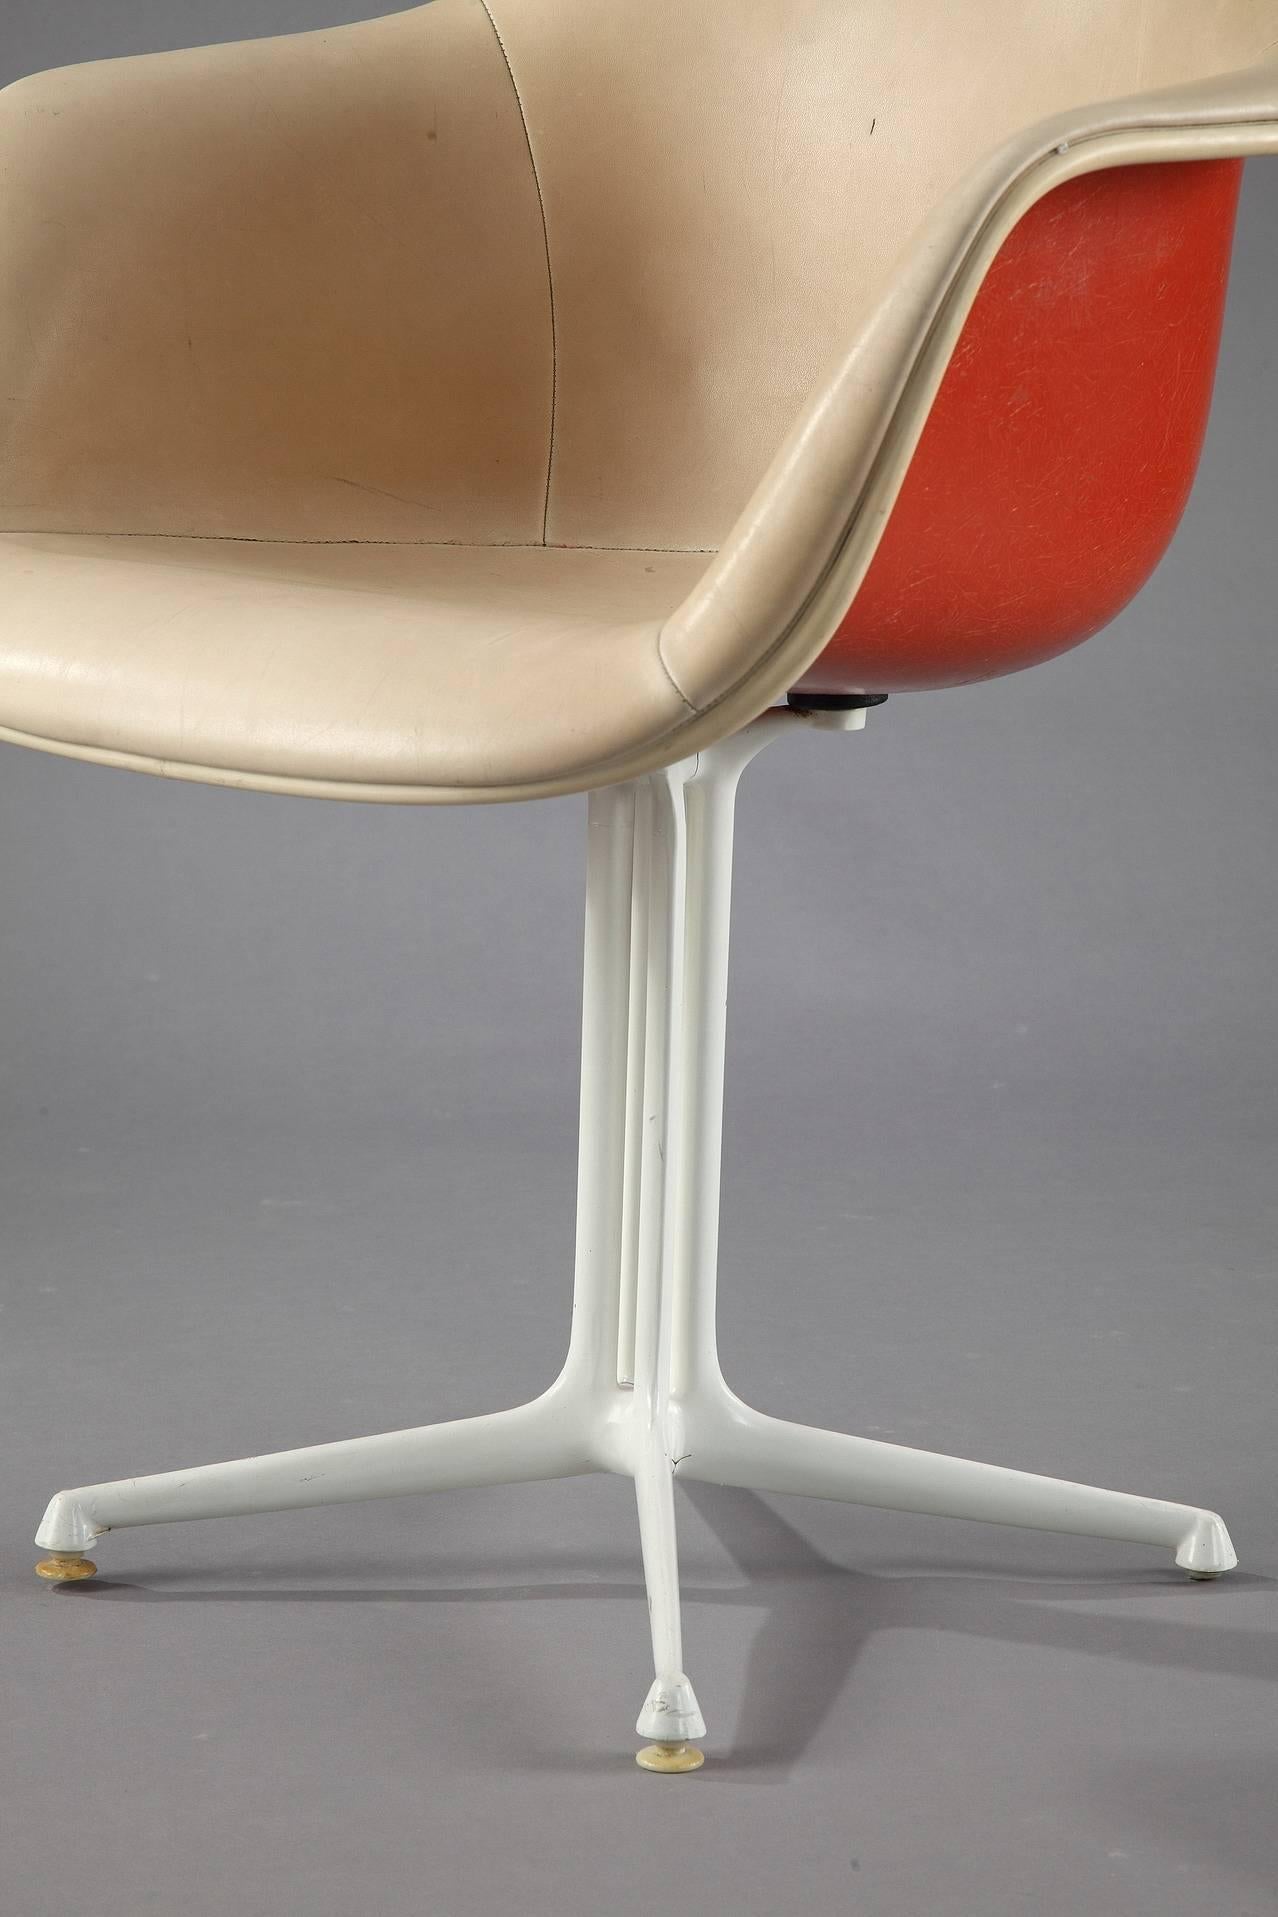 Lacquered Rare Pair of La Fonda Chairs by Charles and Ray Eames